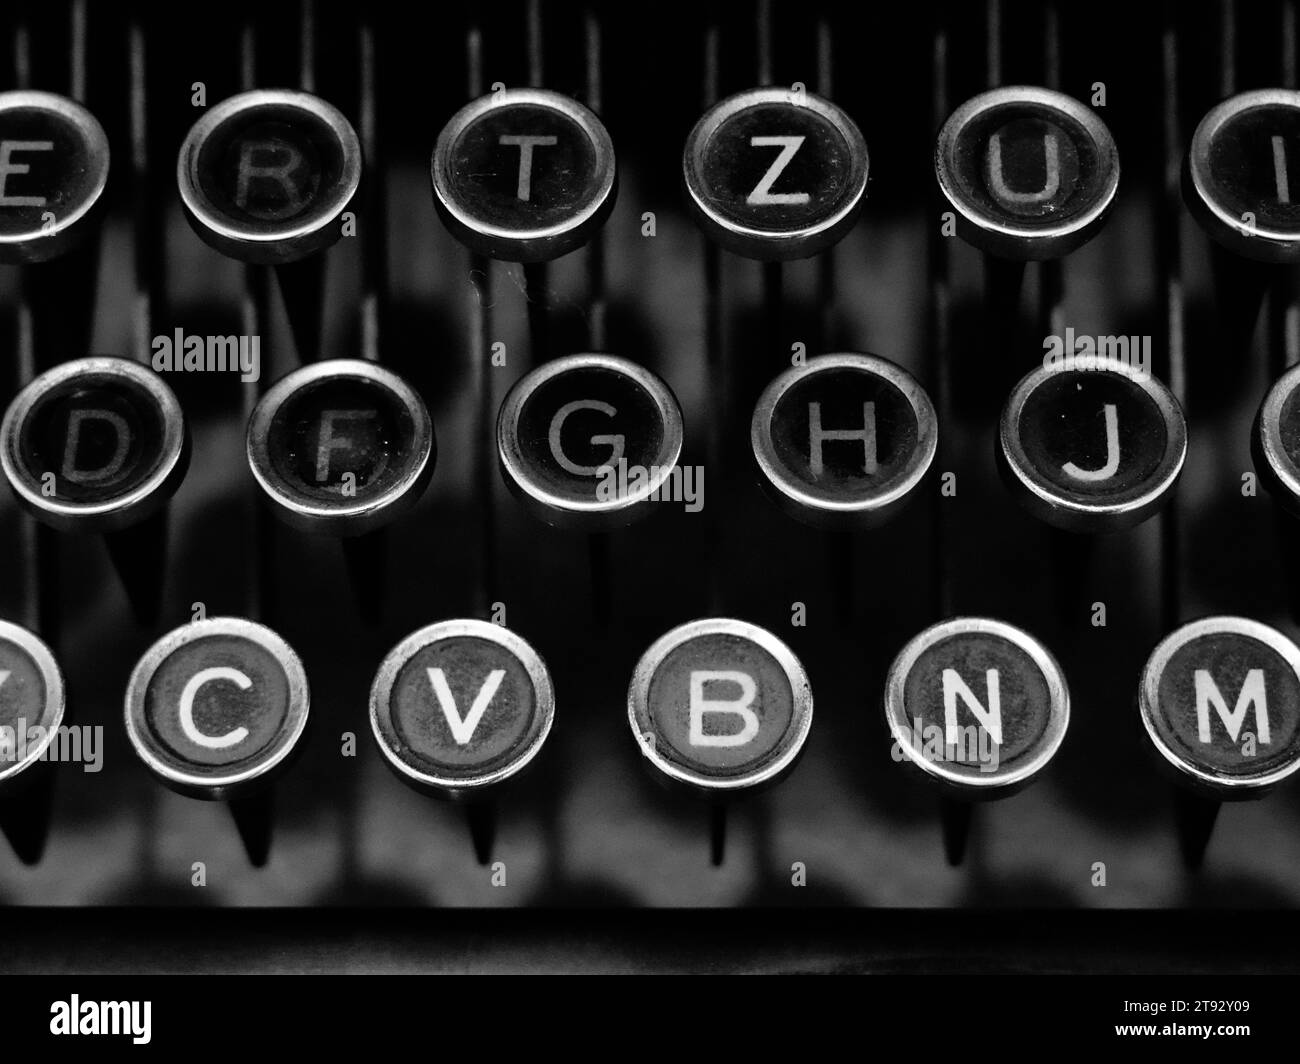 A black and white shot of an antique typewriter's keyboard. Stock Photo